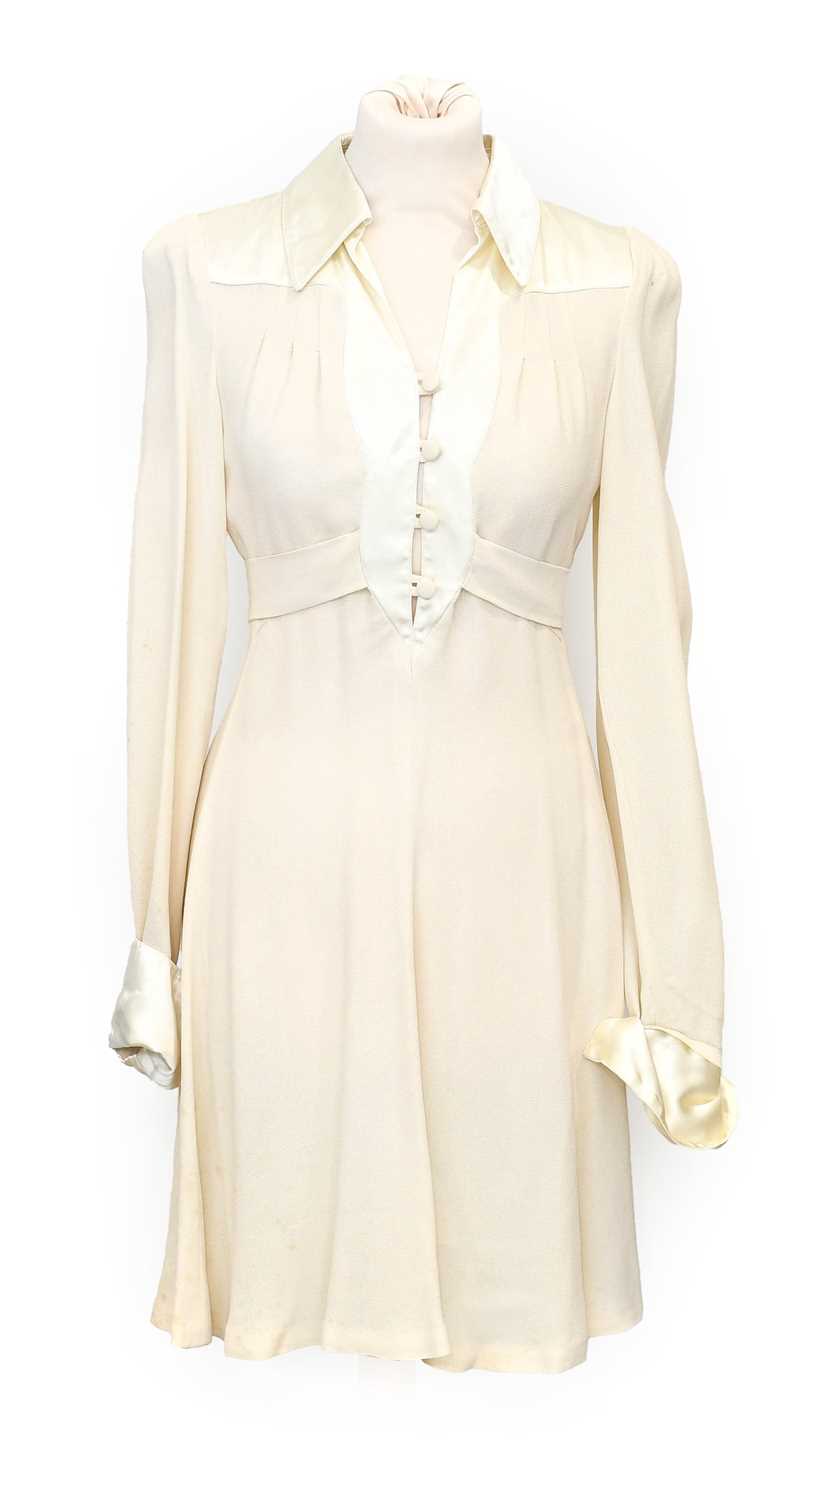 Ossie Clark for Radley Cream Moss Crepe Mini Dress, with long sleeves, mounted with cream satin type